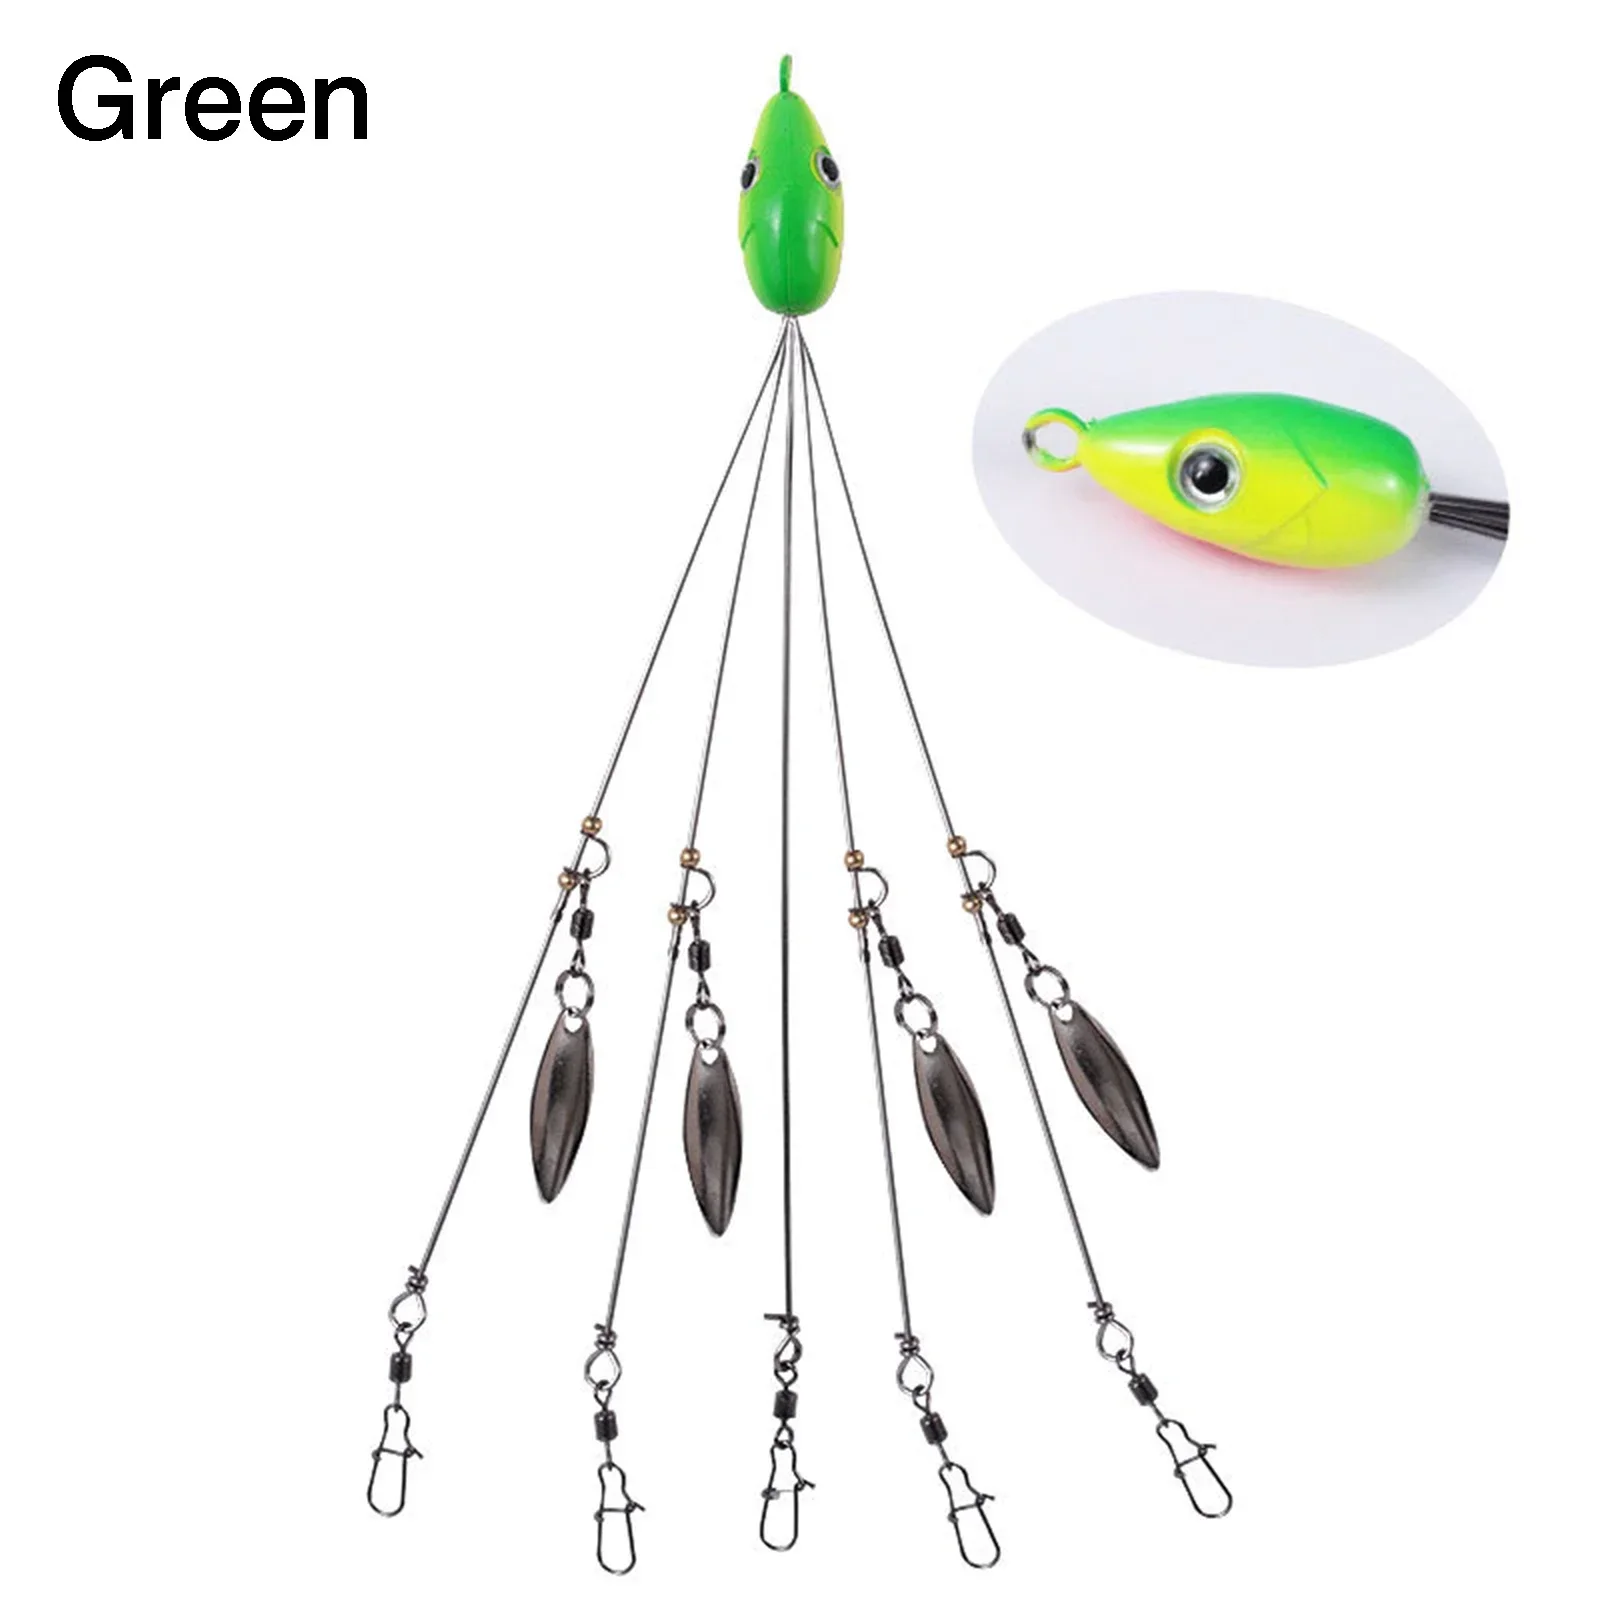 1pcs 5 Arms Alabama Umbrella Rig Fishing Lure Bait Rigs Ultralight Tripod  Willow Blade Multi-Lure Rig Bass Lures Bait Kit